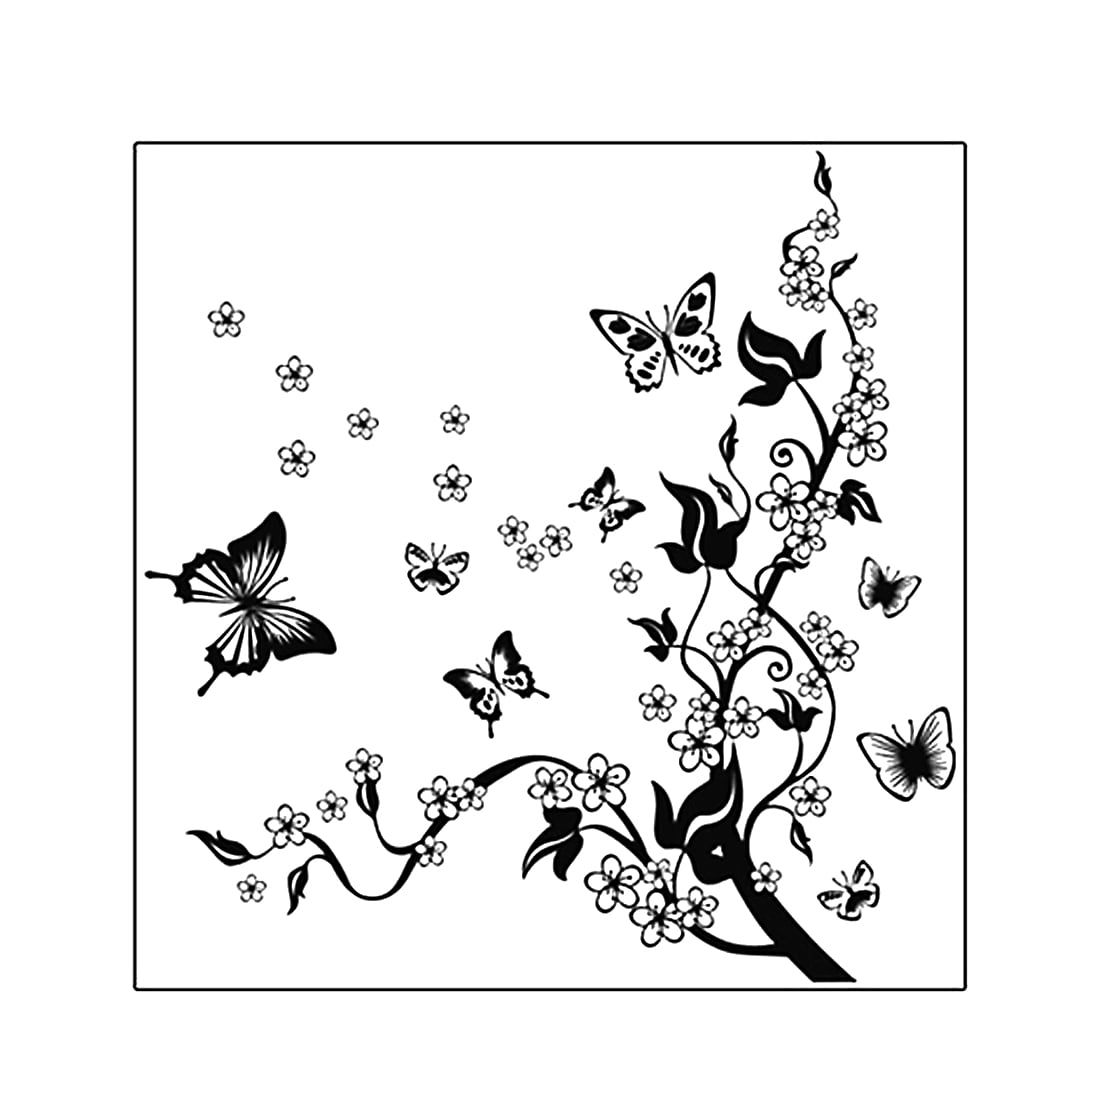 Flowers & Butterfly Art Car Stickers Amazing Decal Car Sticker Home Decor Q 